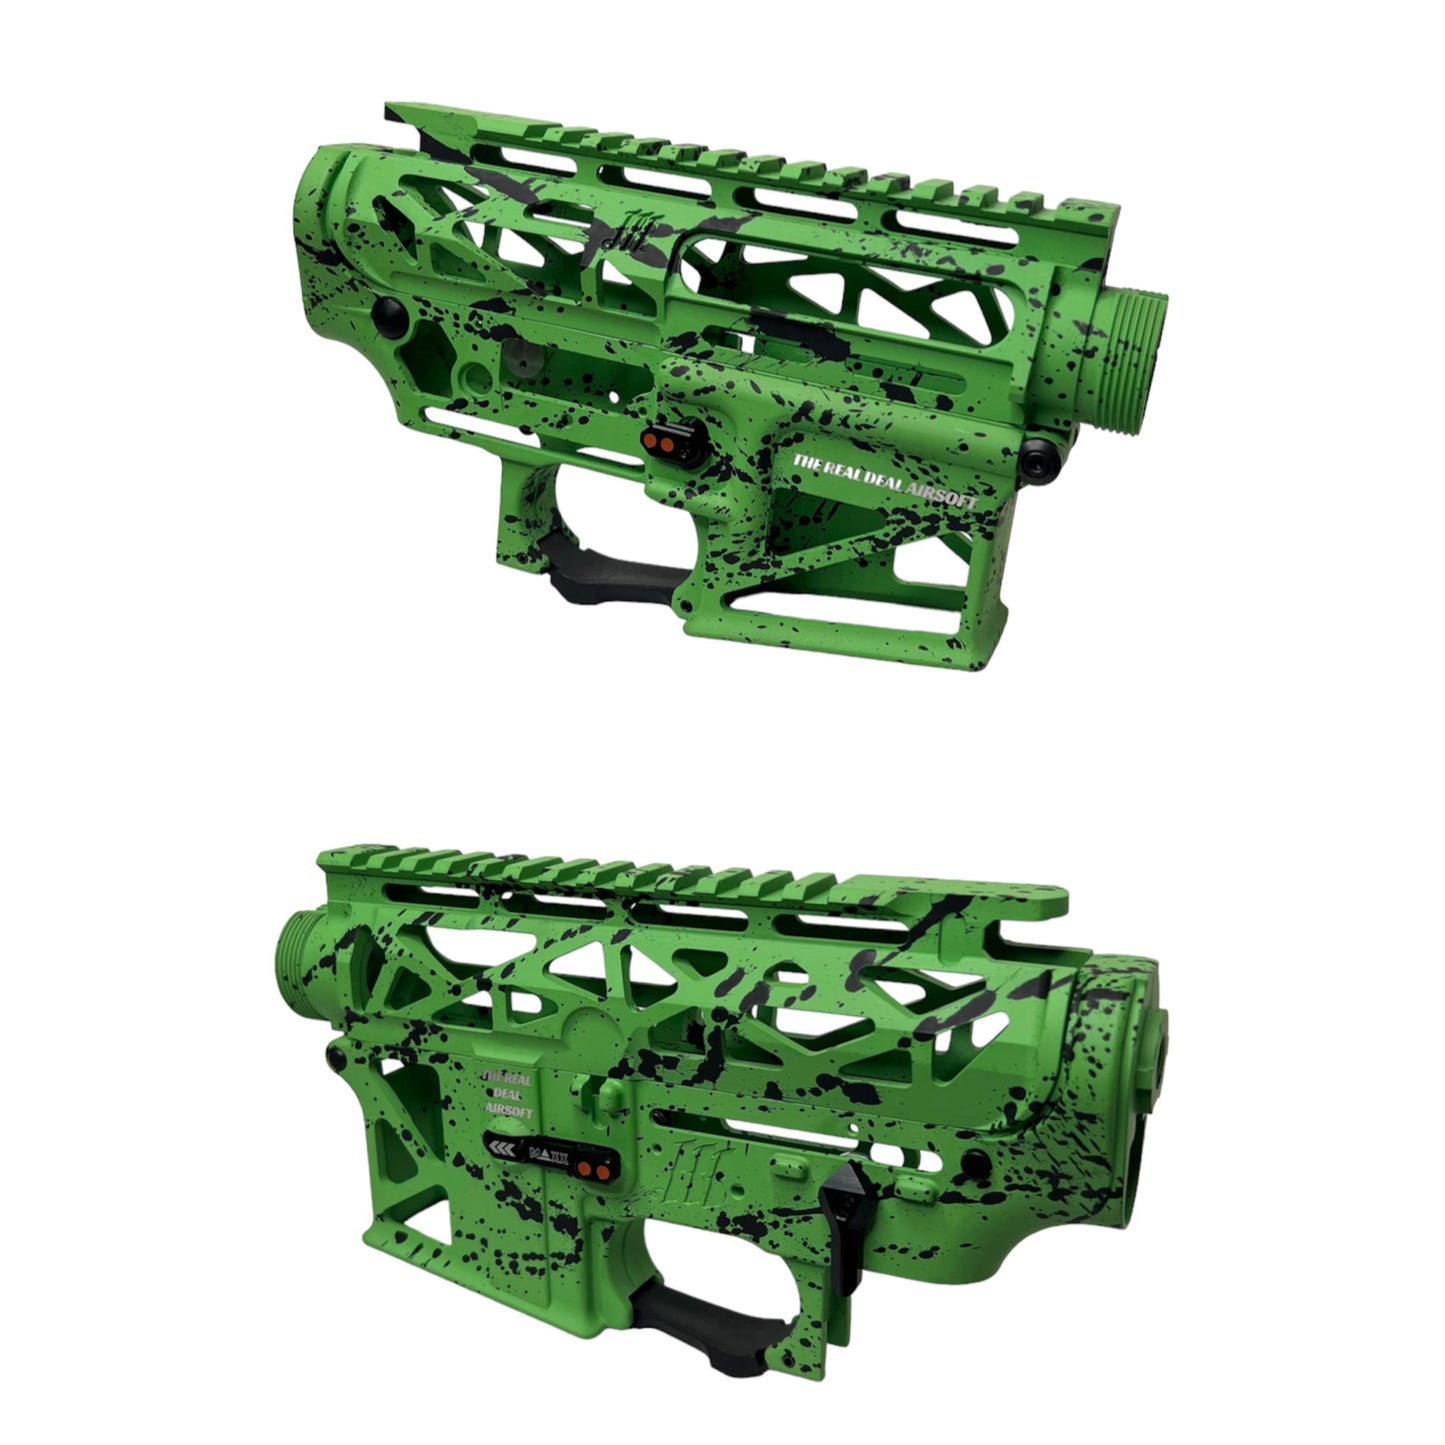 The Real Deal Airsoft "Scatter Boi Body" - Skeletonized Receiver Set